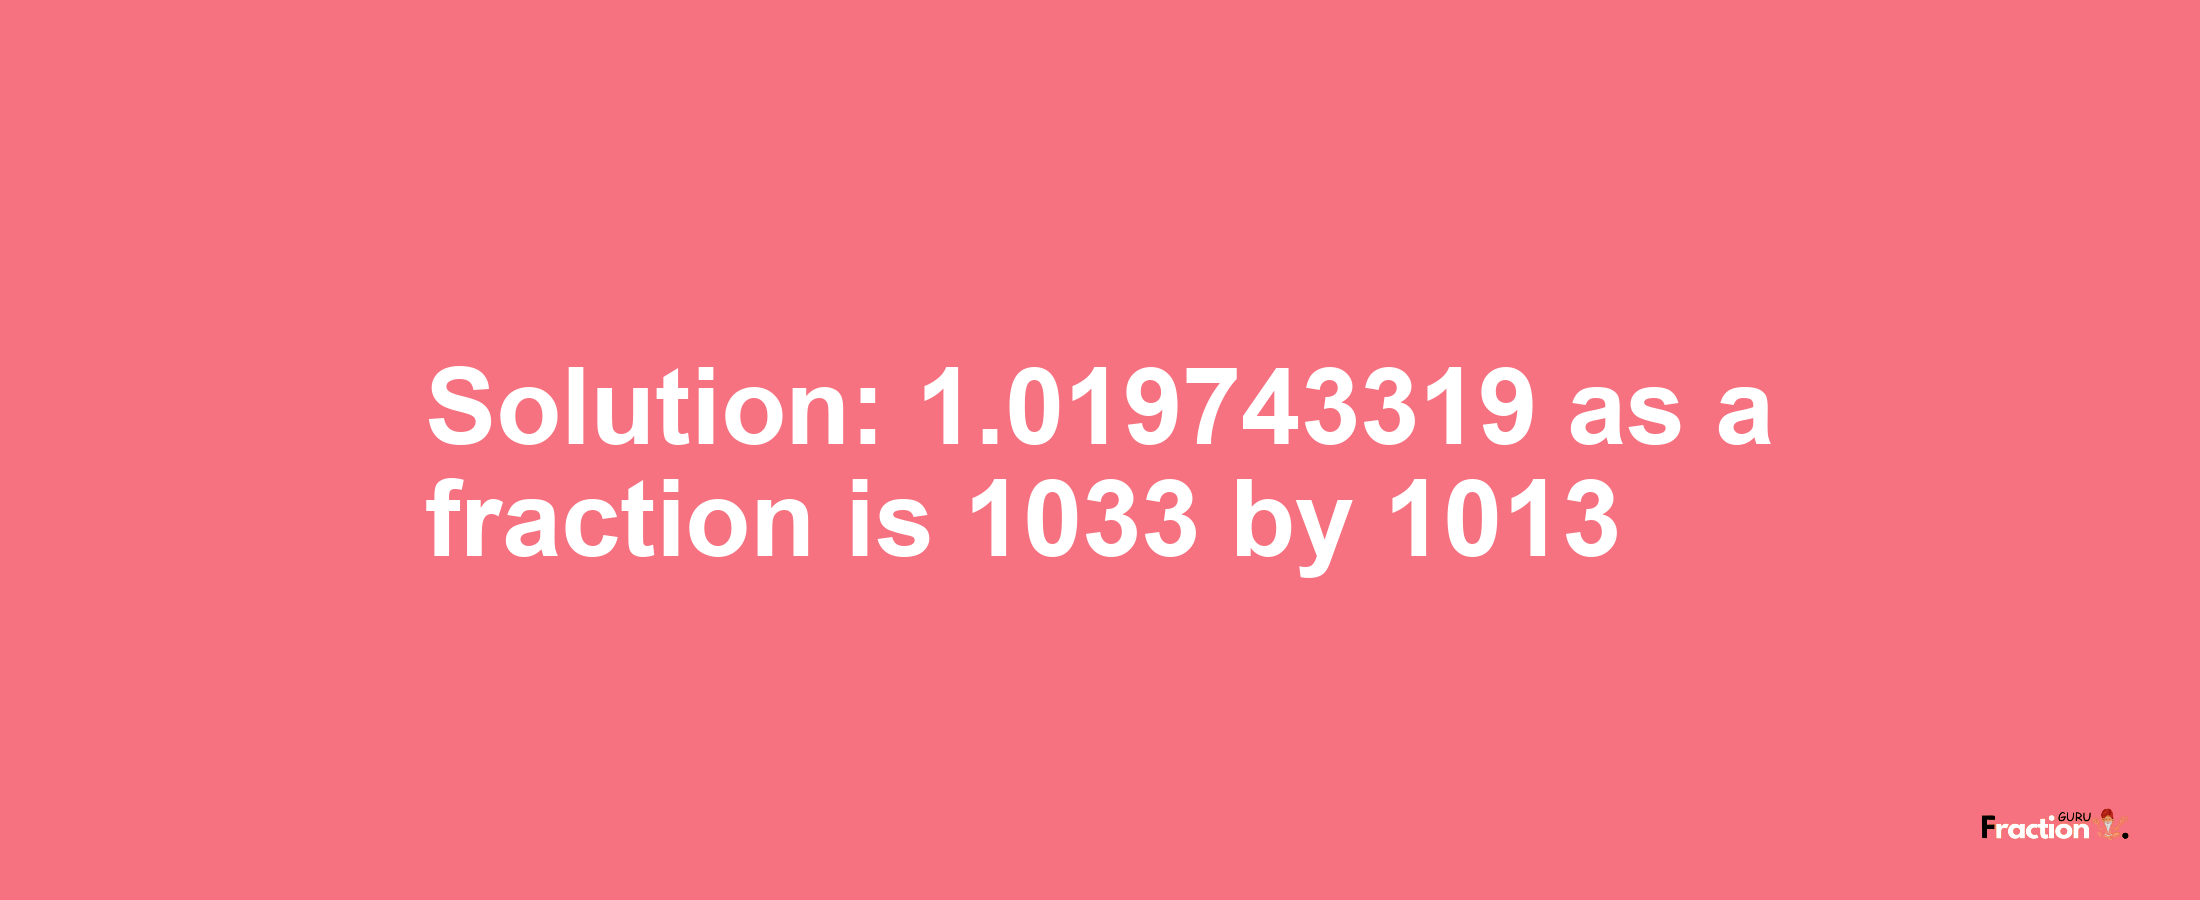 Solution:1.019743319 as a fraction is 1033/1013